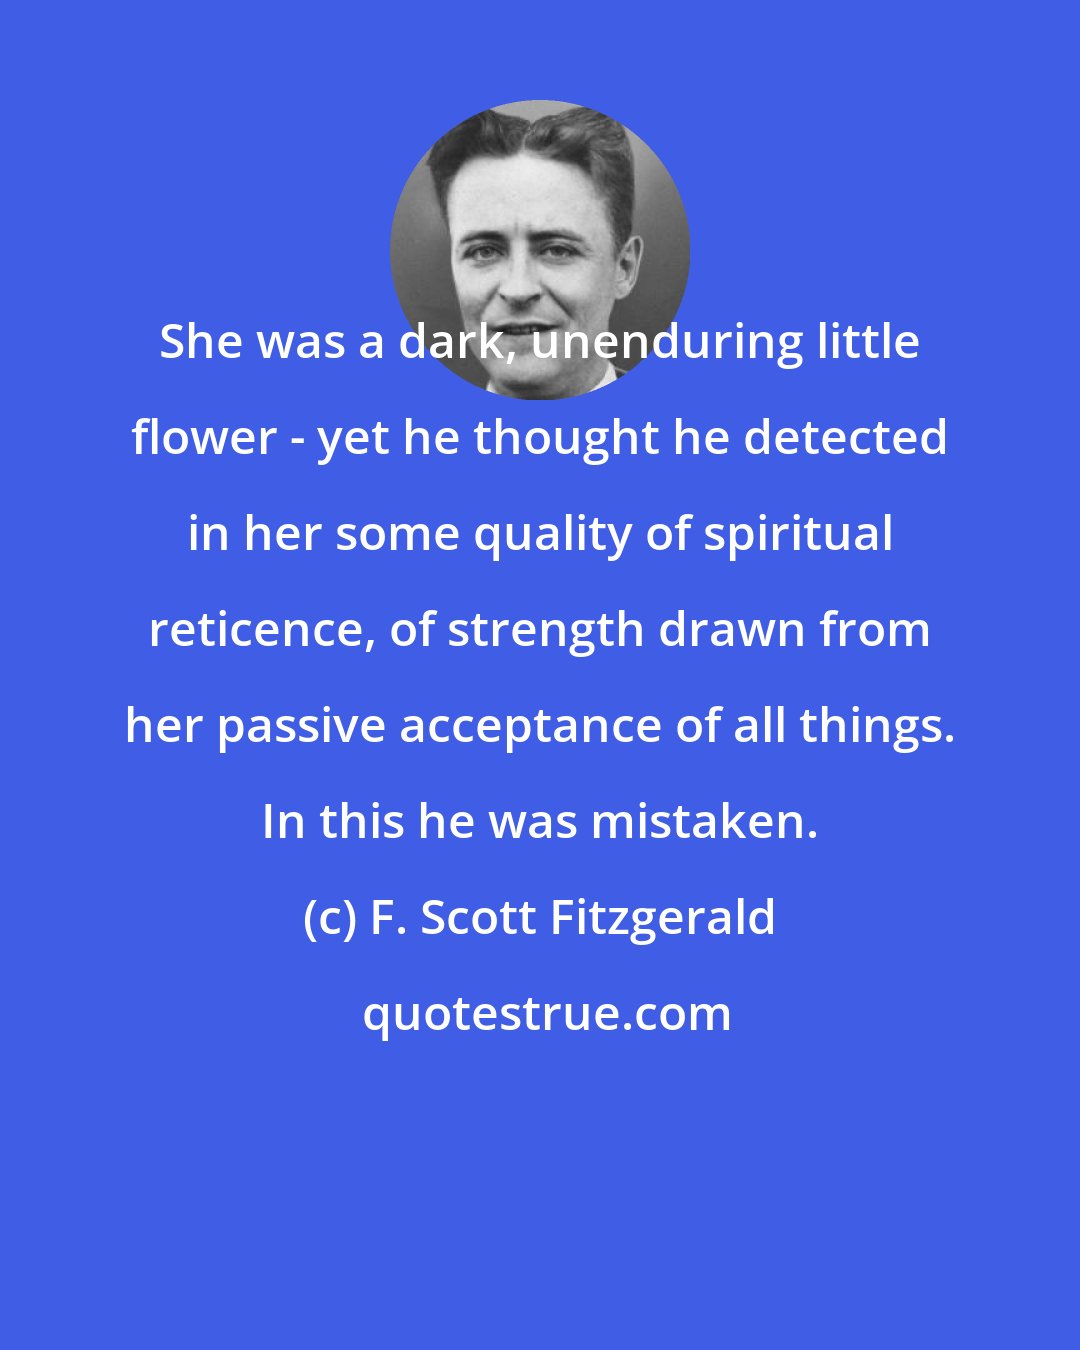 F. Scott Fitzgerald: She was a dark, unenduring little flower - yet he thought he detected in her some quality of spiritual reticence, of strength drawn from her passive acceptance of all things. In this he was mistaken.